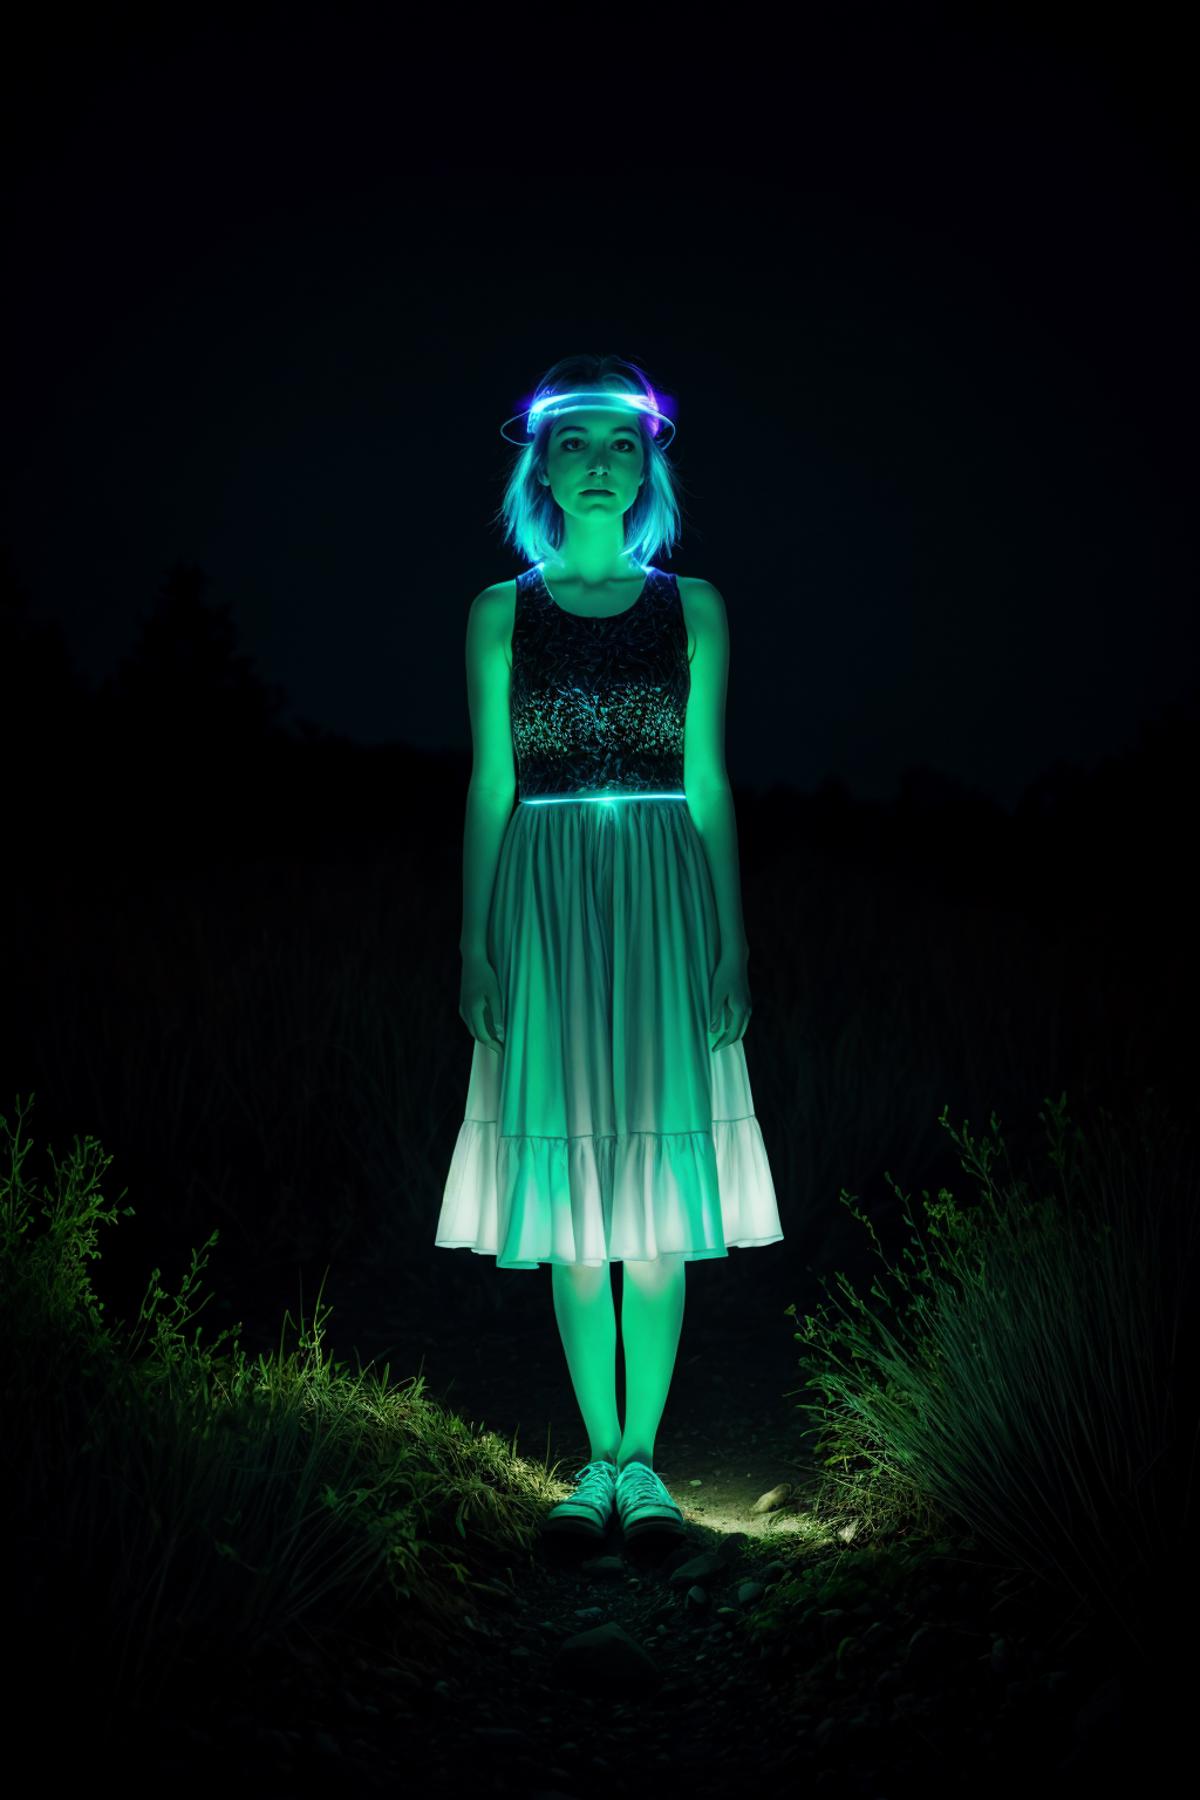 A woman wearing a green dress and a headband with a green light on it.